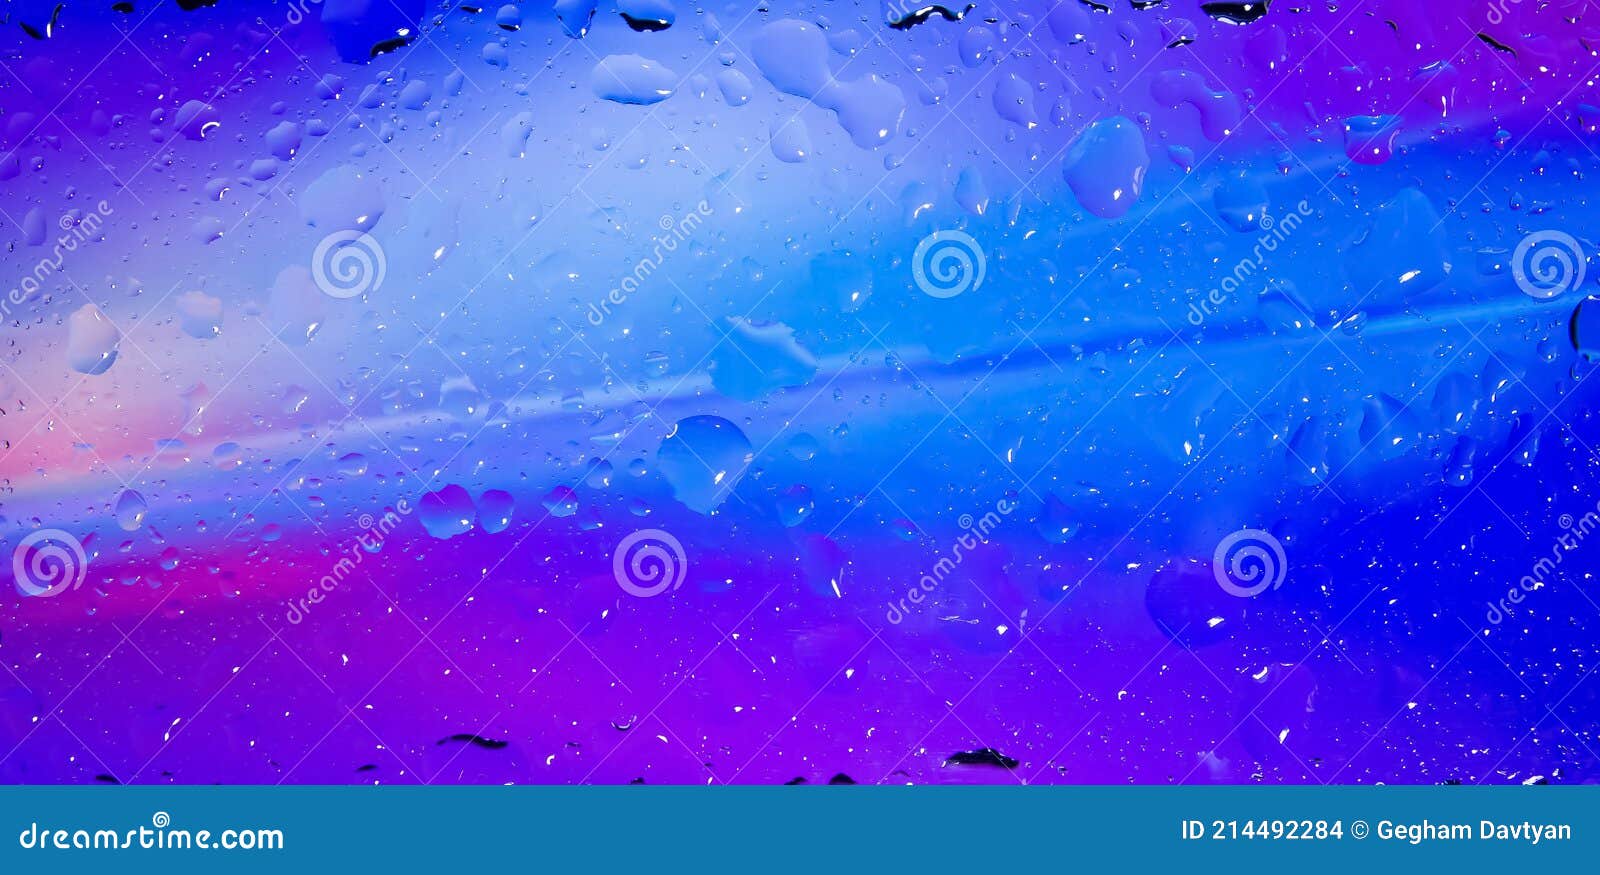 Background with Bubbles, Hd Abstract Background, 4k Wallpaper with Bubbles  Stock Photo - Image of blur, dark: 214492284